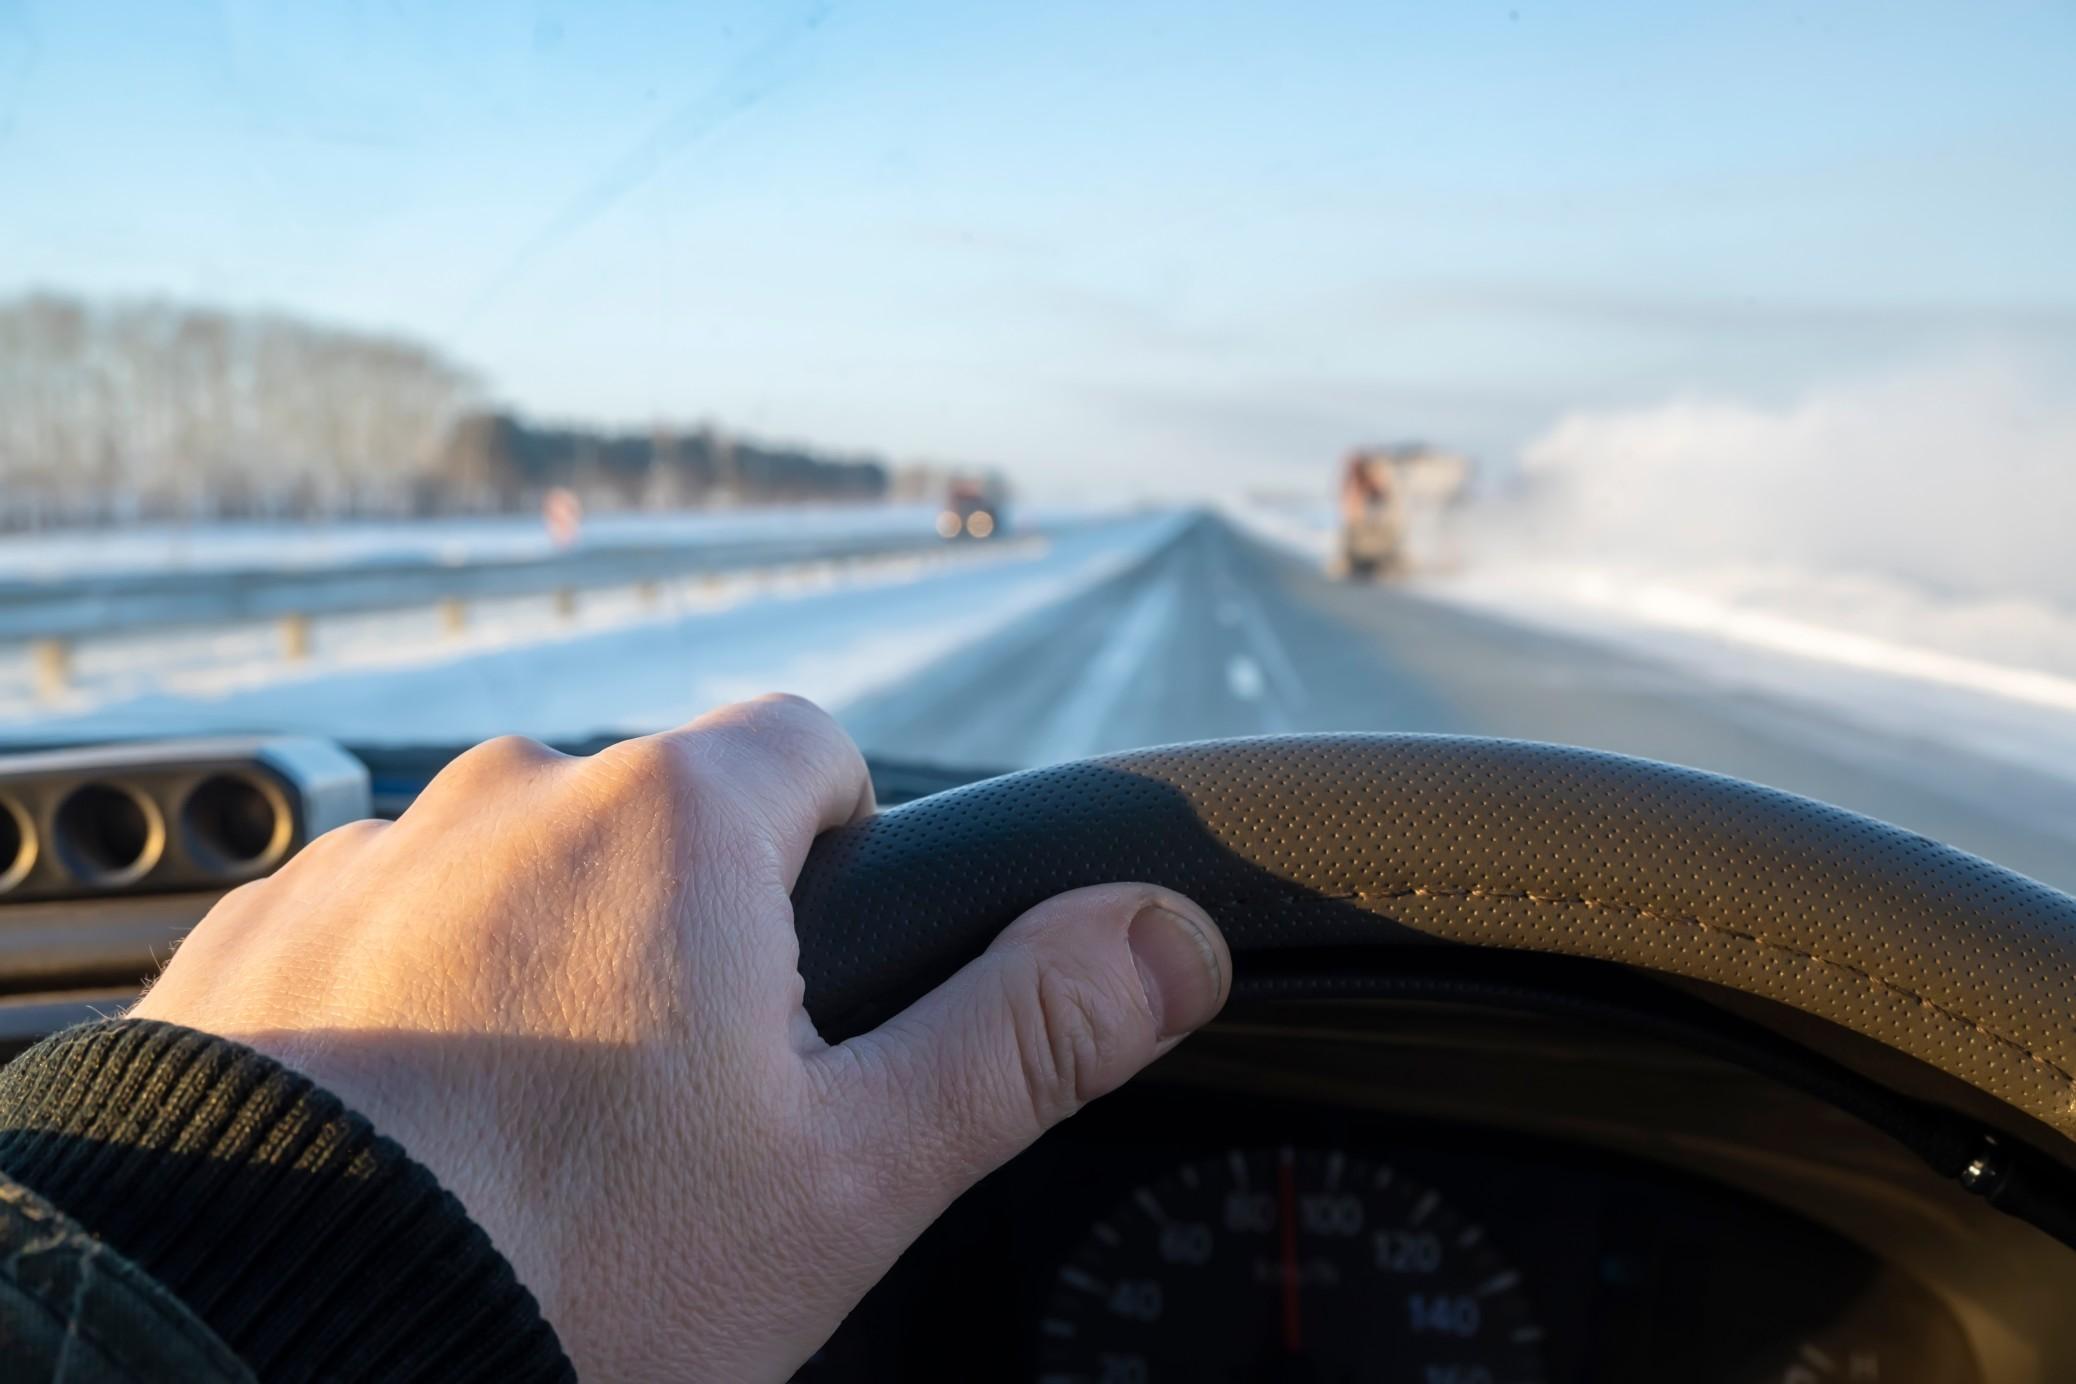 A driver's hand on a steering wheel, driving on a snowy highway.